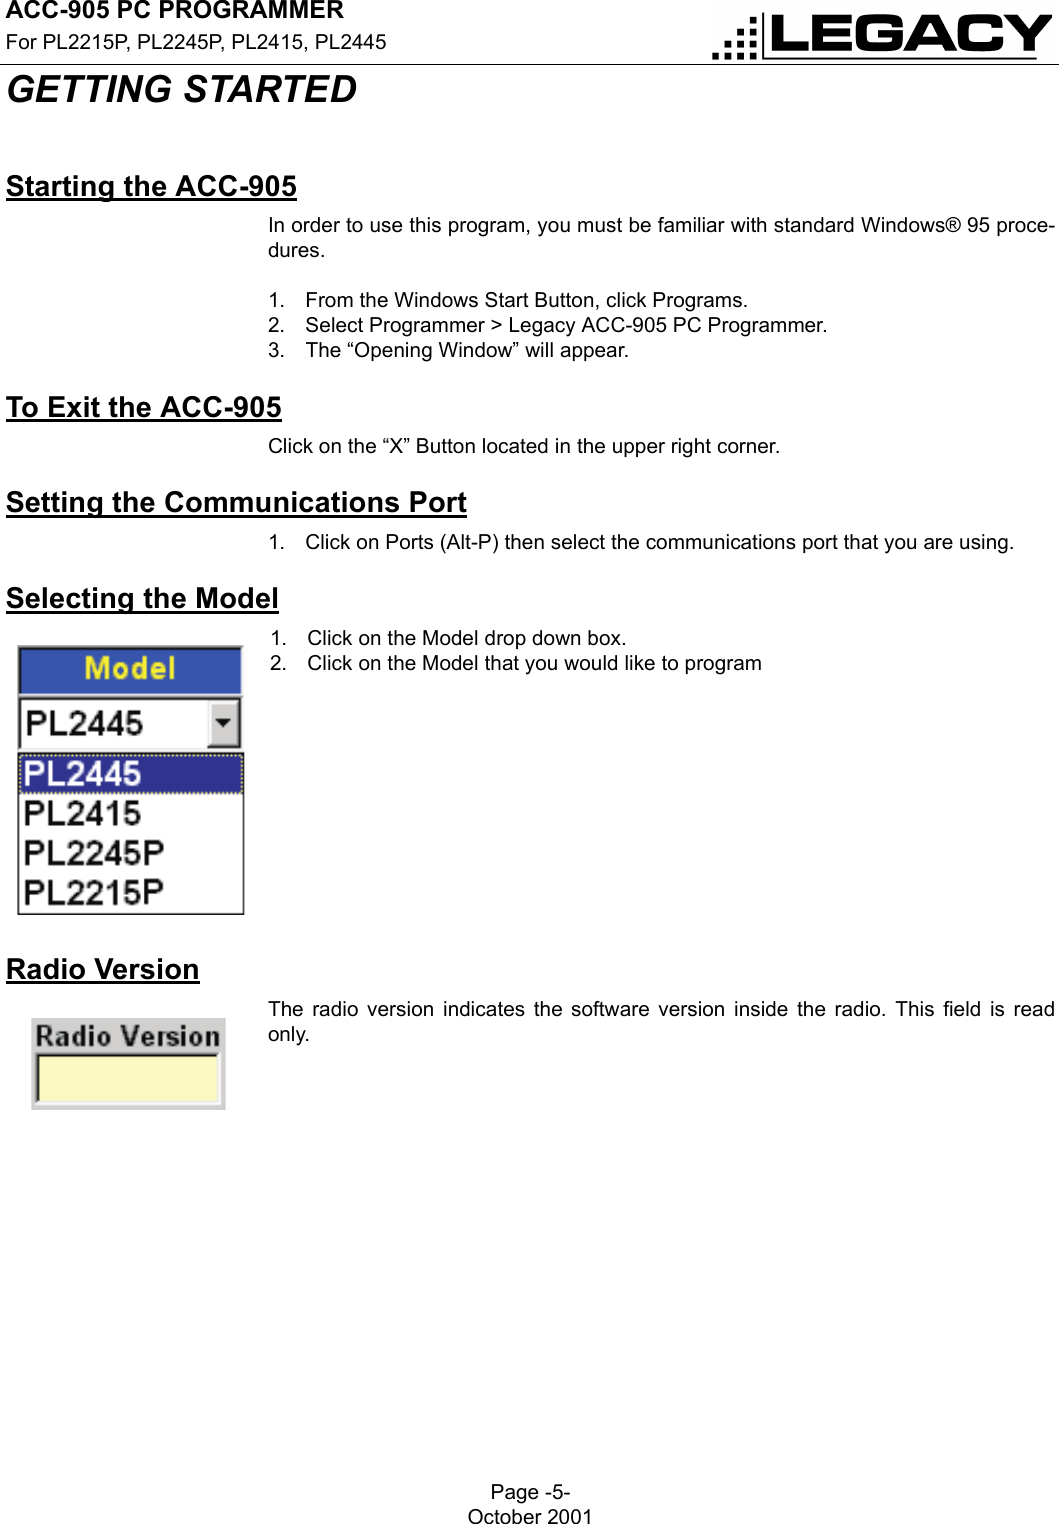 ACC-905 PC PROGRAMMERFor PL2215P, PL2245P, PL2415, PL2445Page -5-October 2001GETTING STARTEDGETTING STARTEDStarting the ACC-905In order to use this program, you must be familiar with standard Windows® 95 proce-dures.1. From the Windows Start Button, click Programs.2. Select Programmer &gt; Legacy ACC-905 PC Programmer.3. The “Opening Window” will appear.To Exit the ACC-905Click on the “X” Button located in the upper right corner.Setting the Communications Port1. Click on Ports (Alt-P) then select the communications port that you are using.Selecting the Model1. Click on the Model drop down box.2. Click on the Model that you would like to programRadio VersionThe radio version indicates the software version inside the radio. This field is readonly.